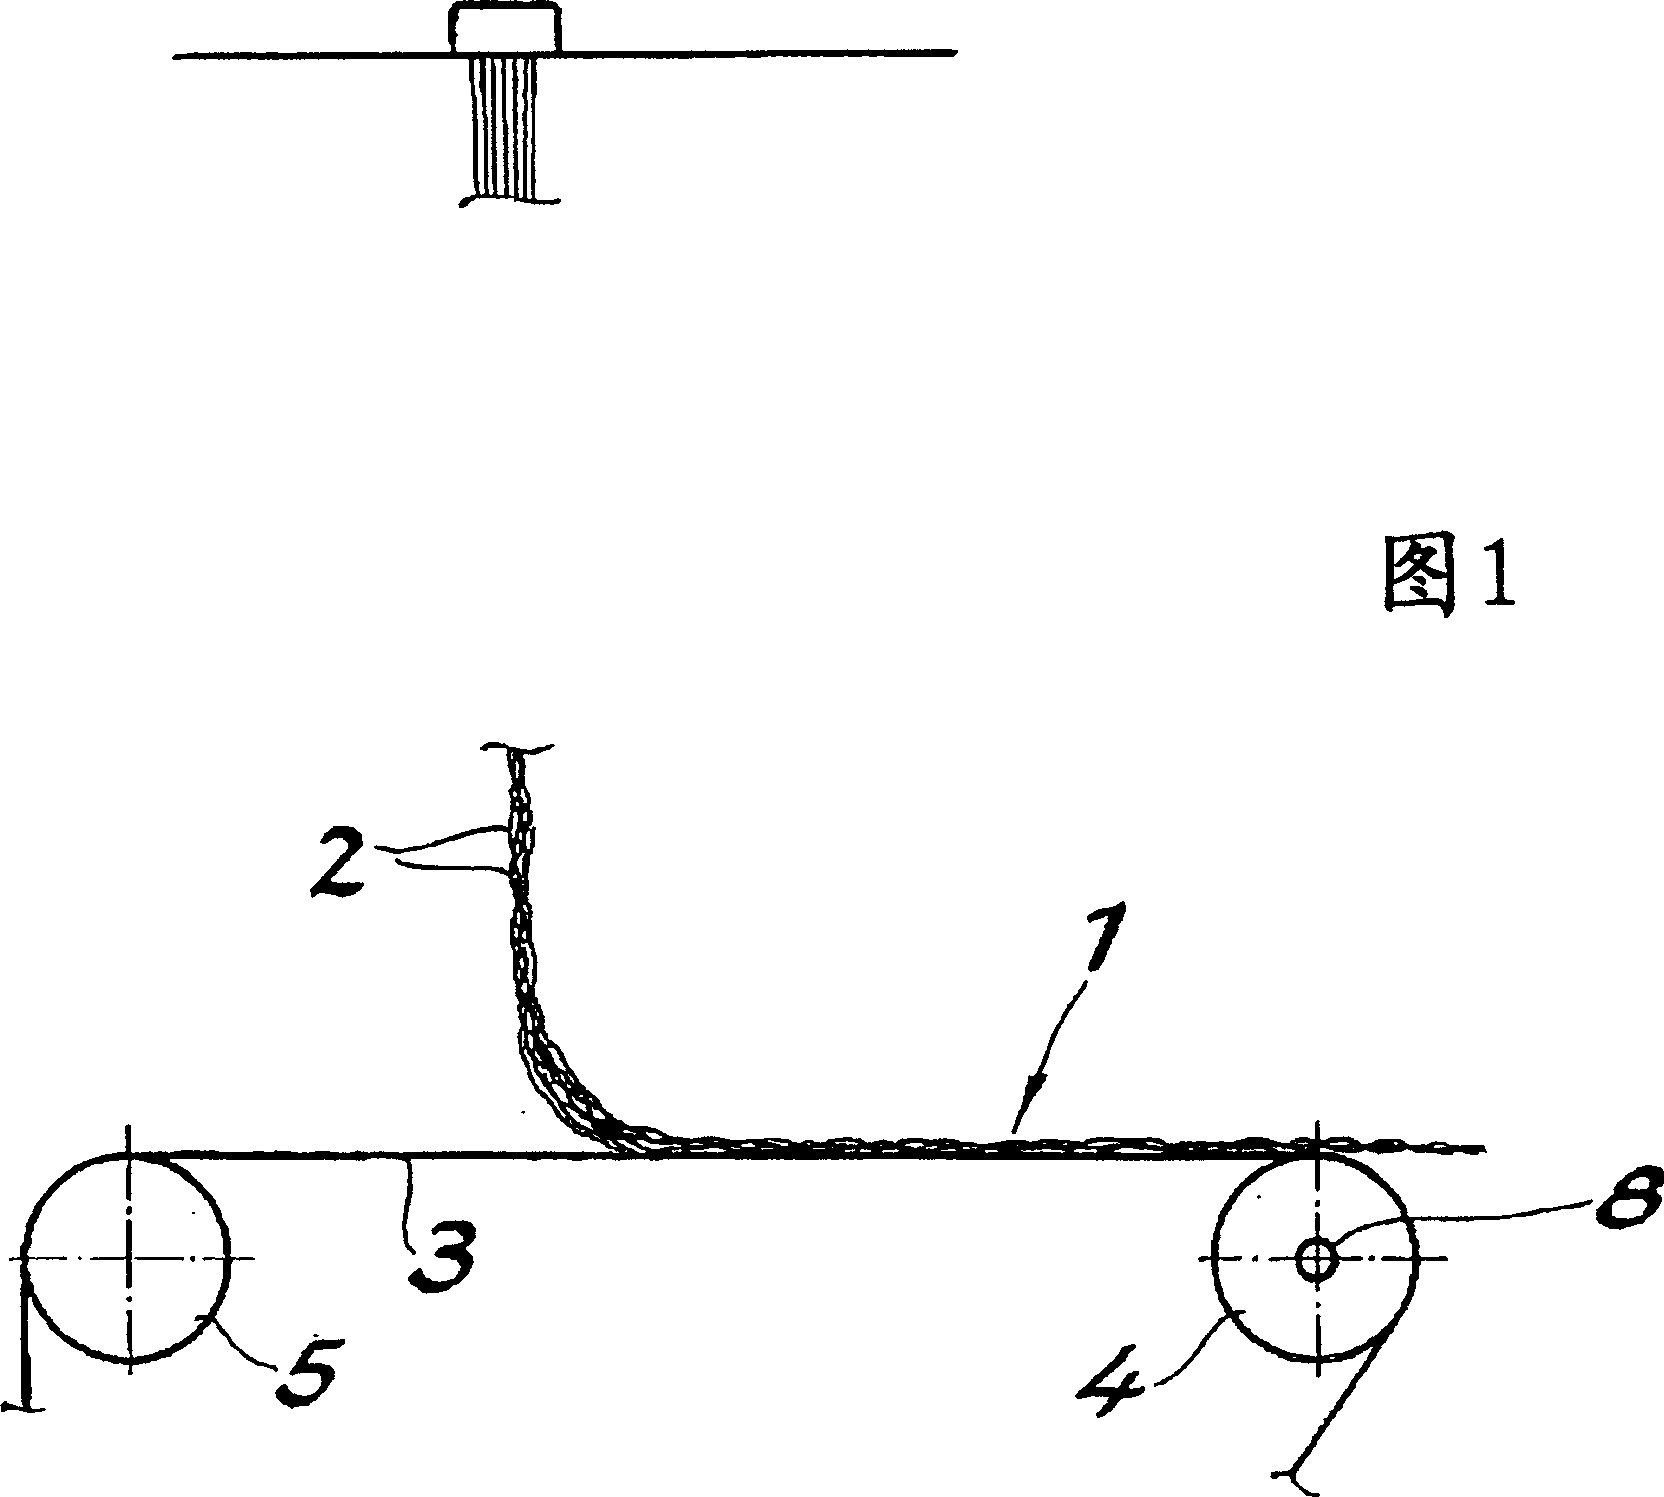 Apparatus for stacking and delivering non-woven fabric fiber-net